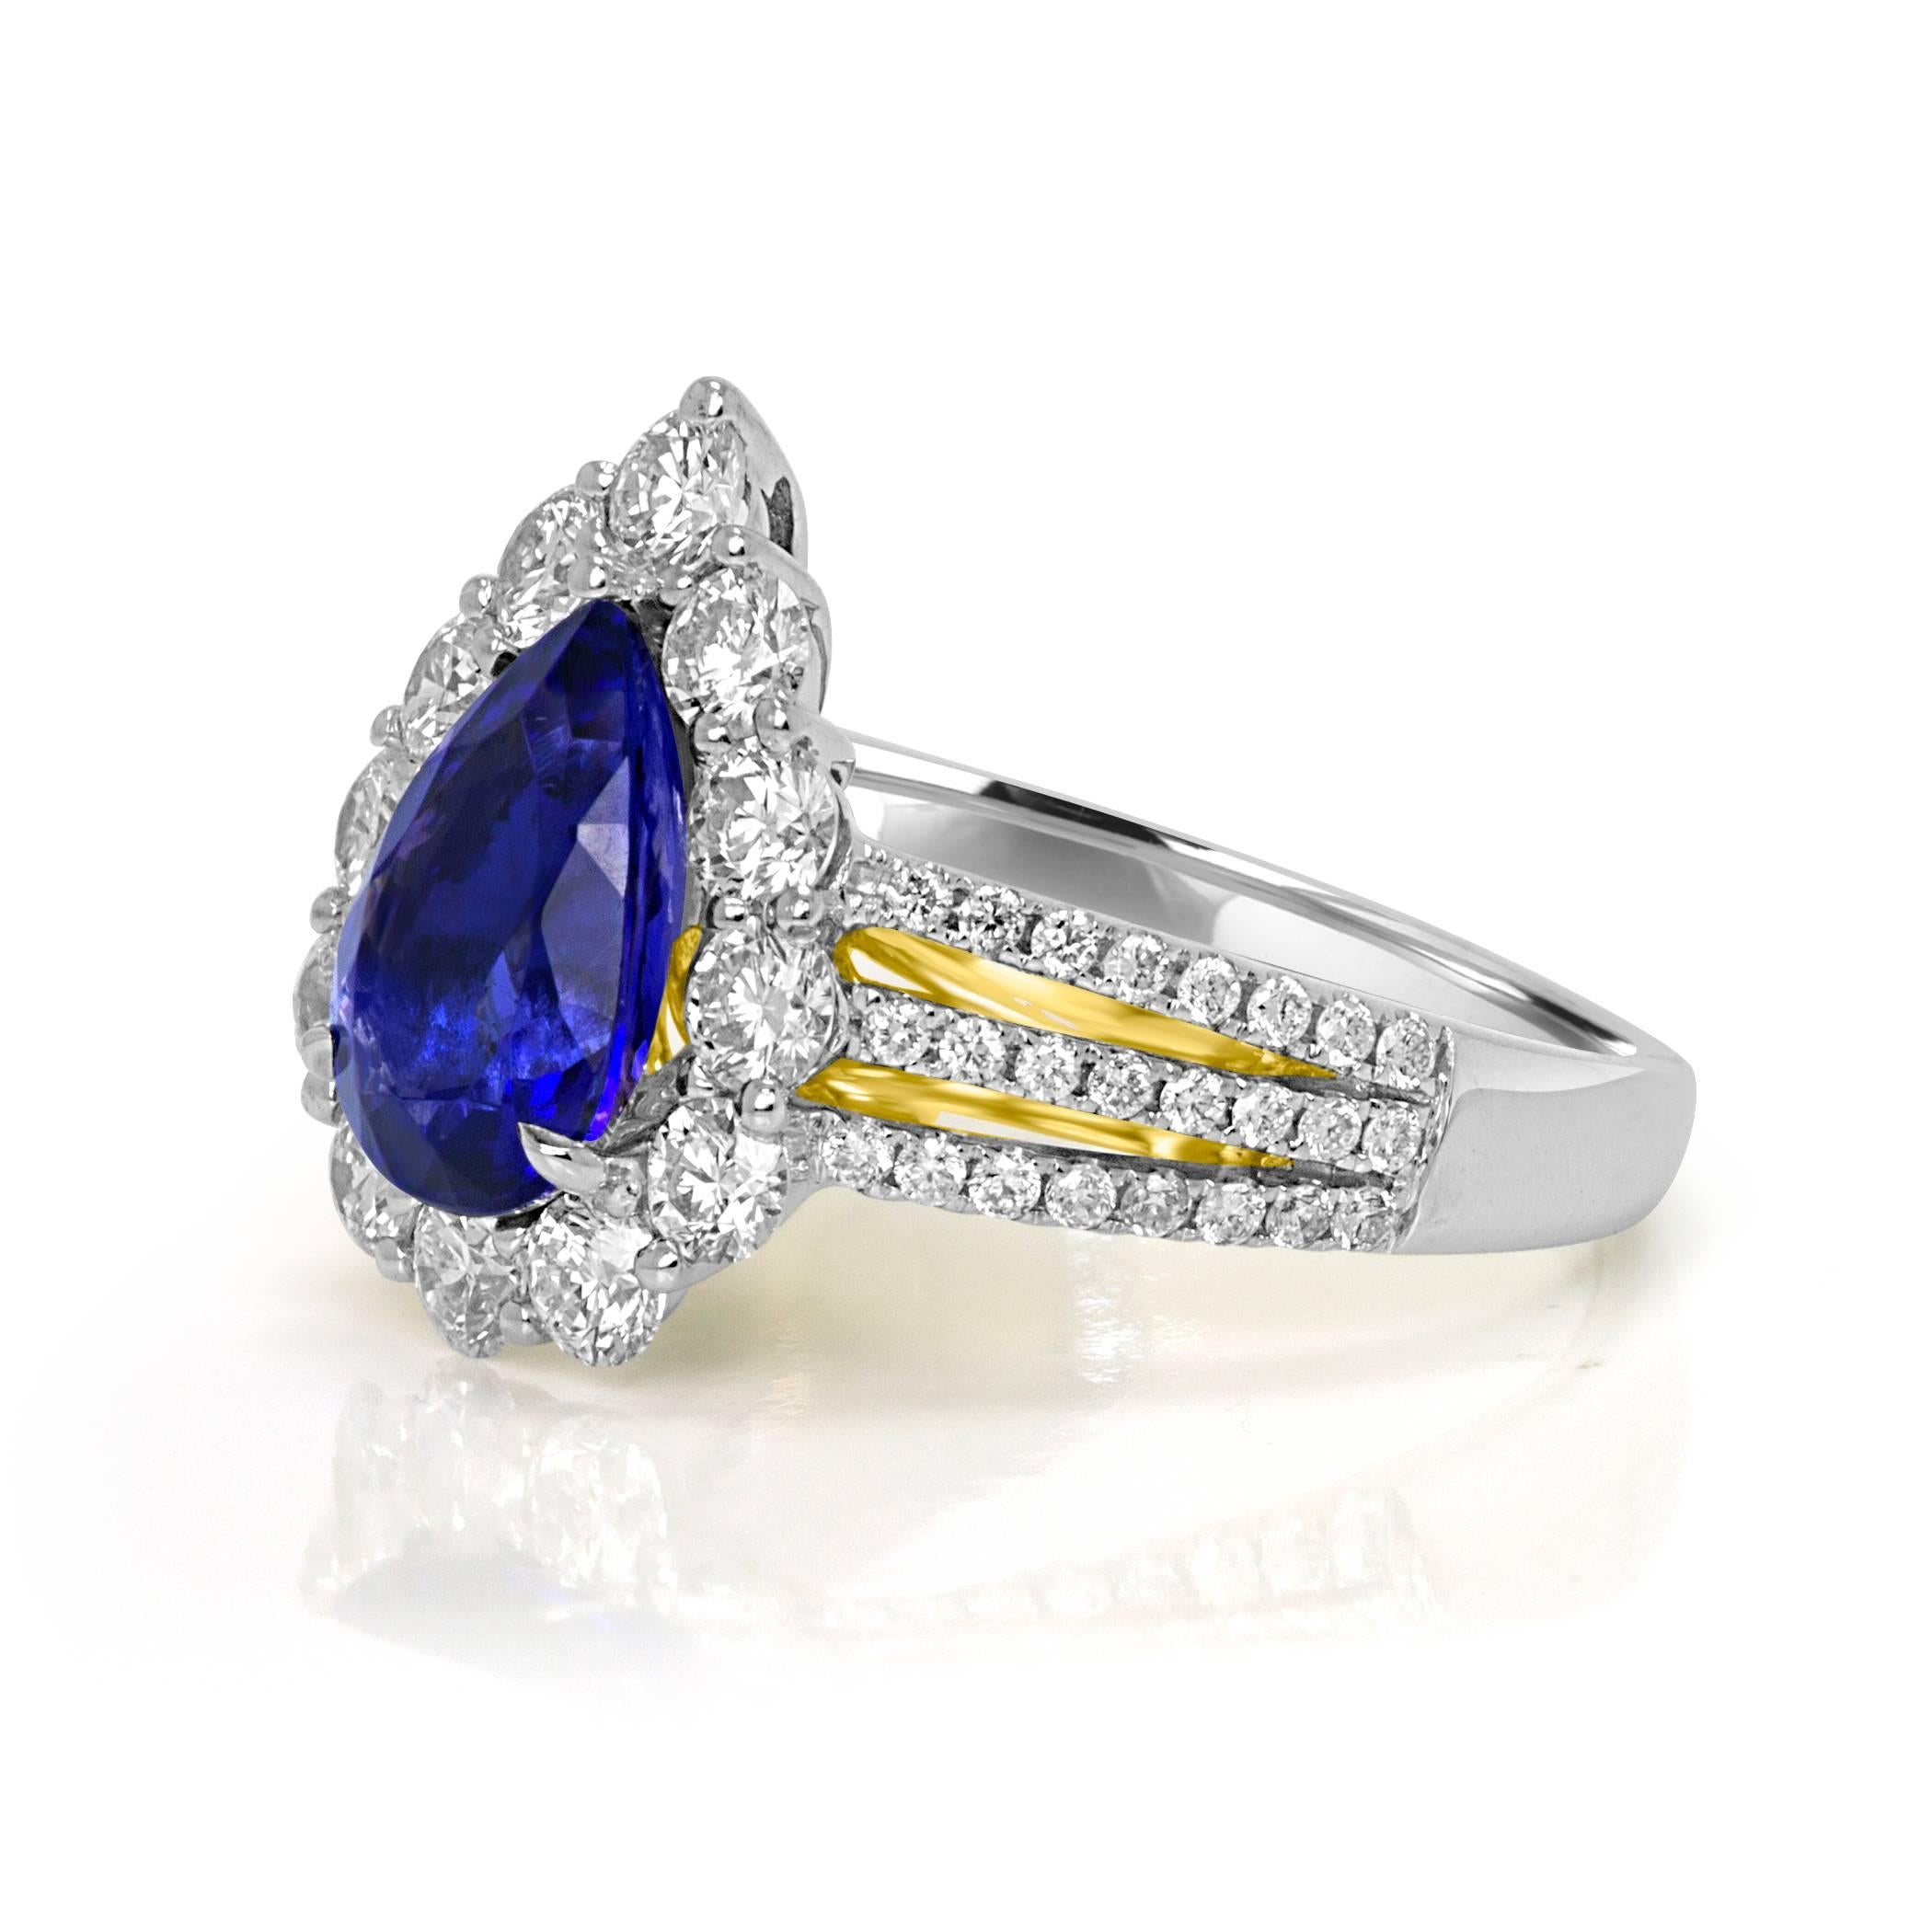 Tanzanite Pear Shape 2.44 Carat encircled in a Halo of White Diamonds 1.30 Carat with a three prong shank with White Diamonds 0.35 Carat In 18K white and yellow Gold Fashion Cocktail Ring. 

Style available in different price ranges. Prices are